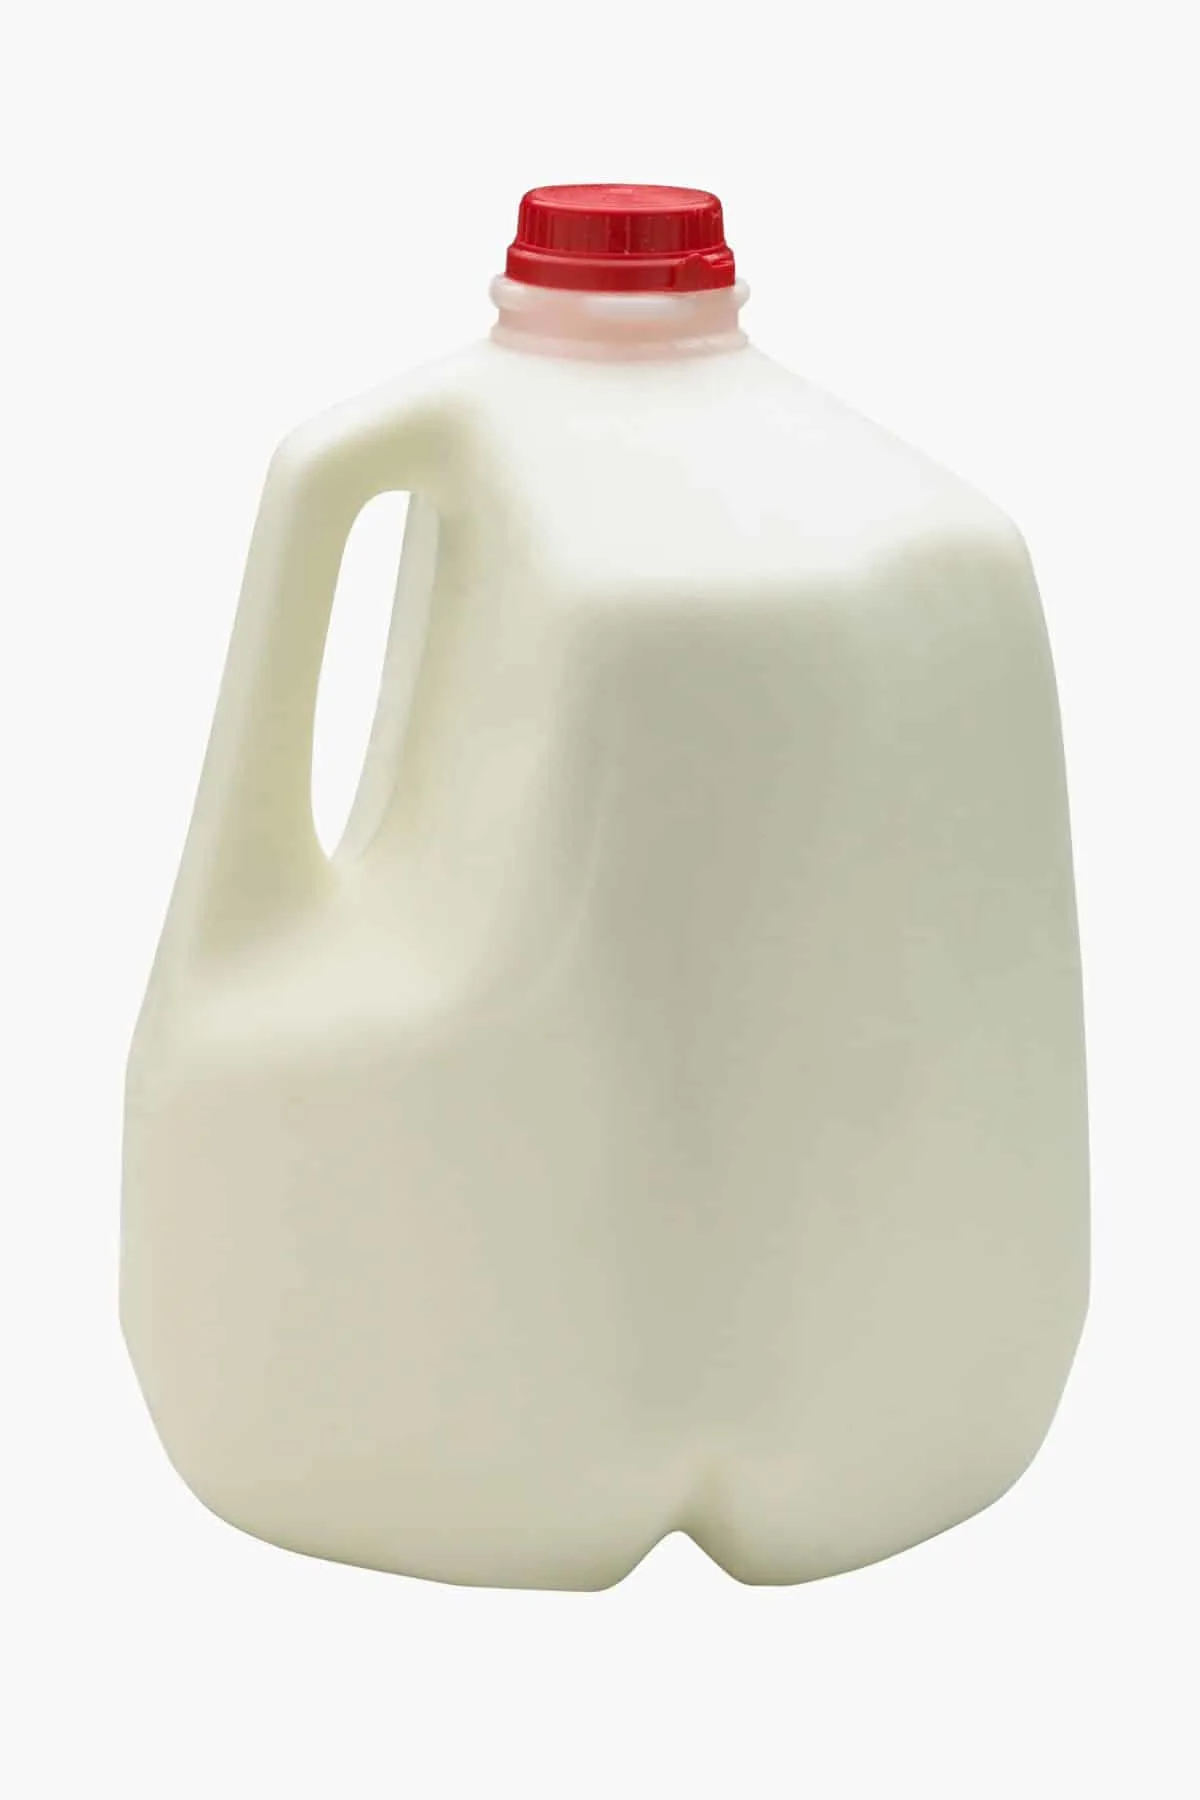 gallon jug of milk with red top